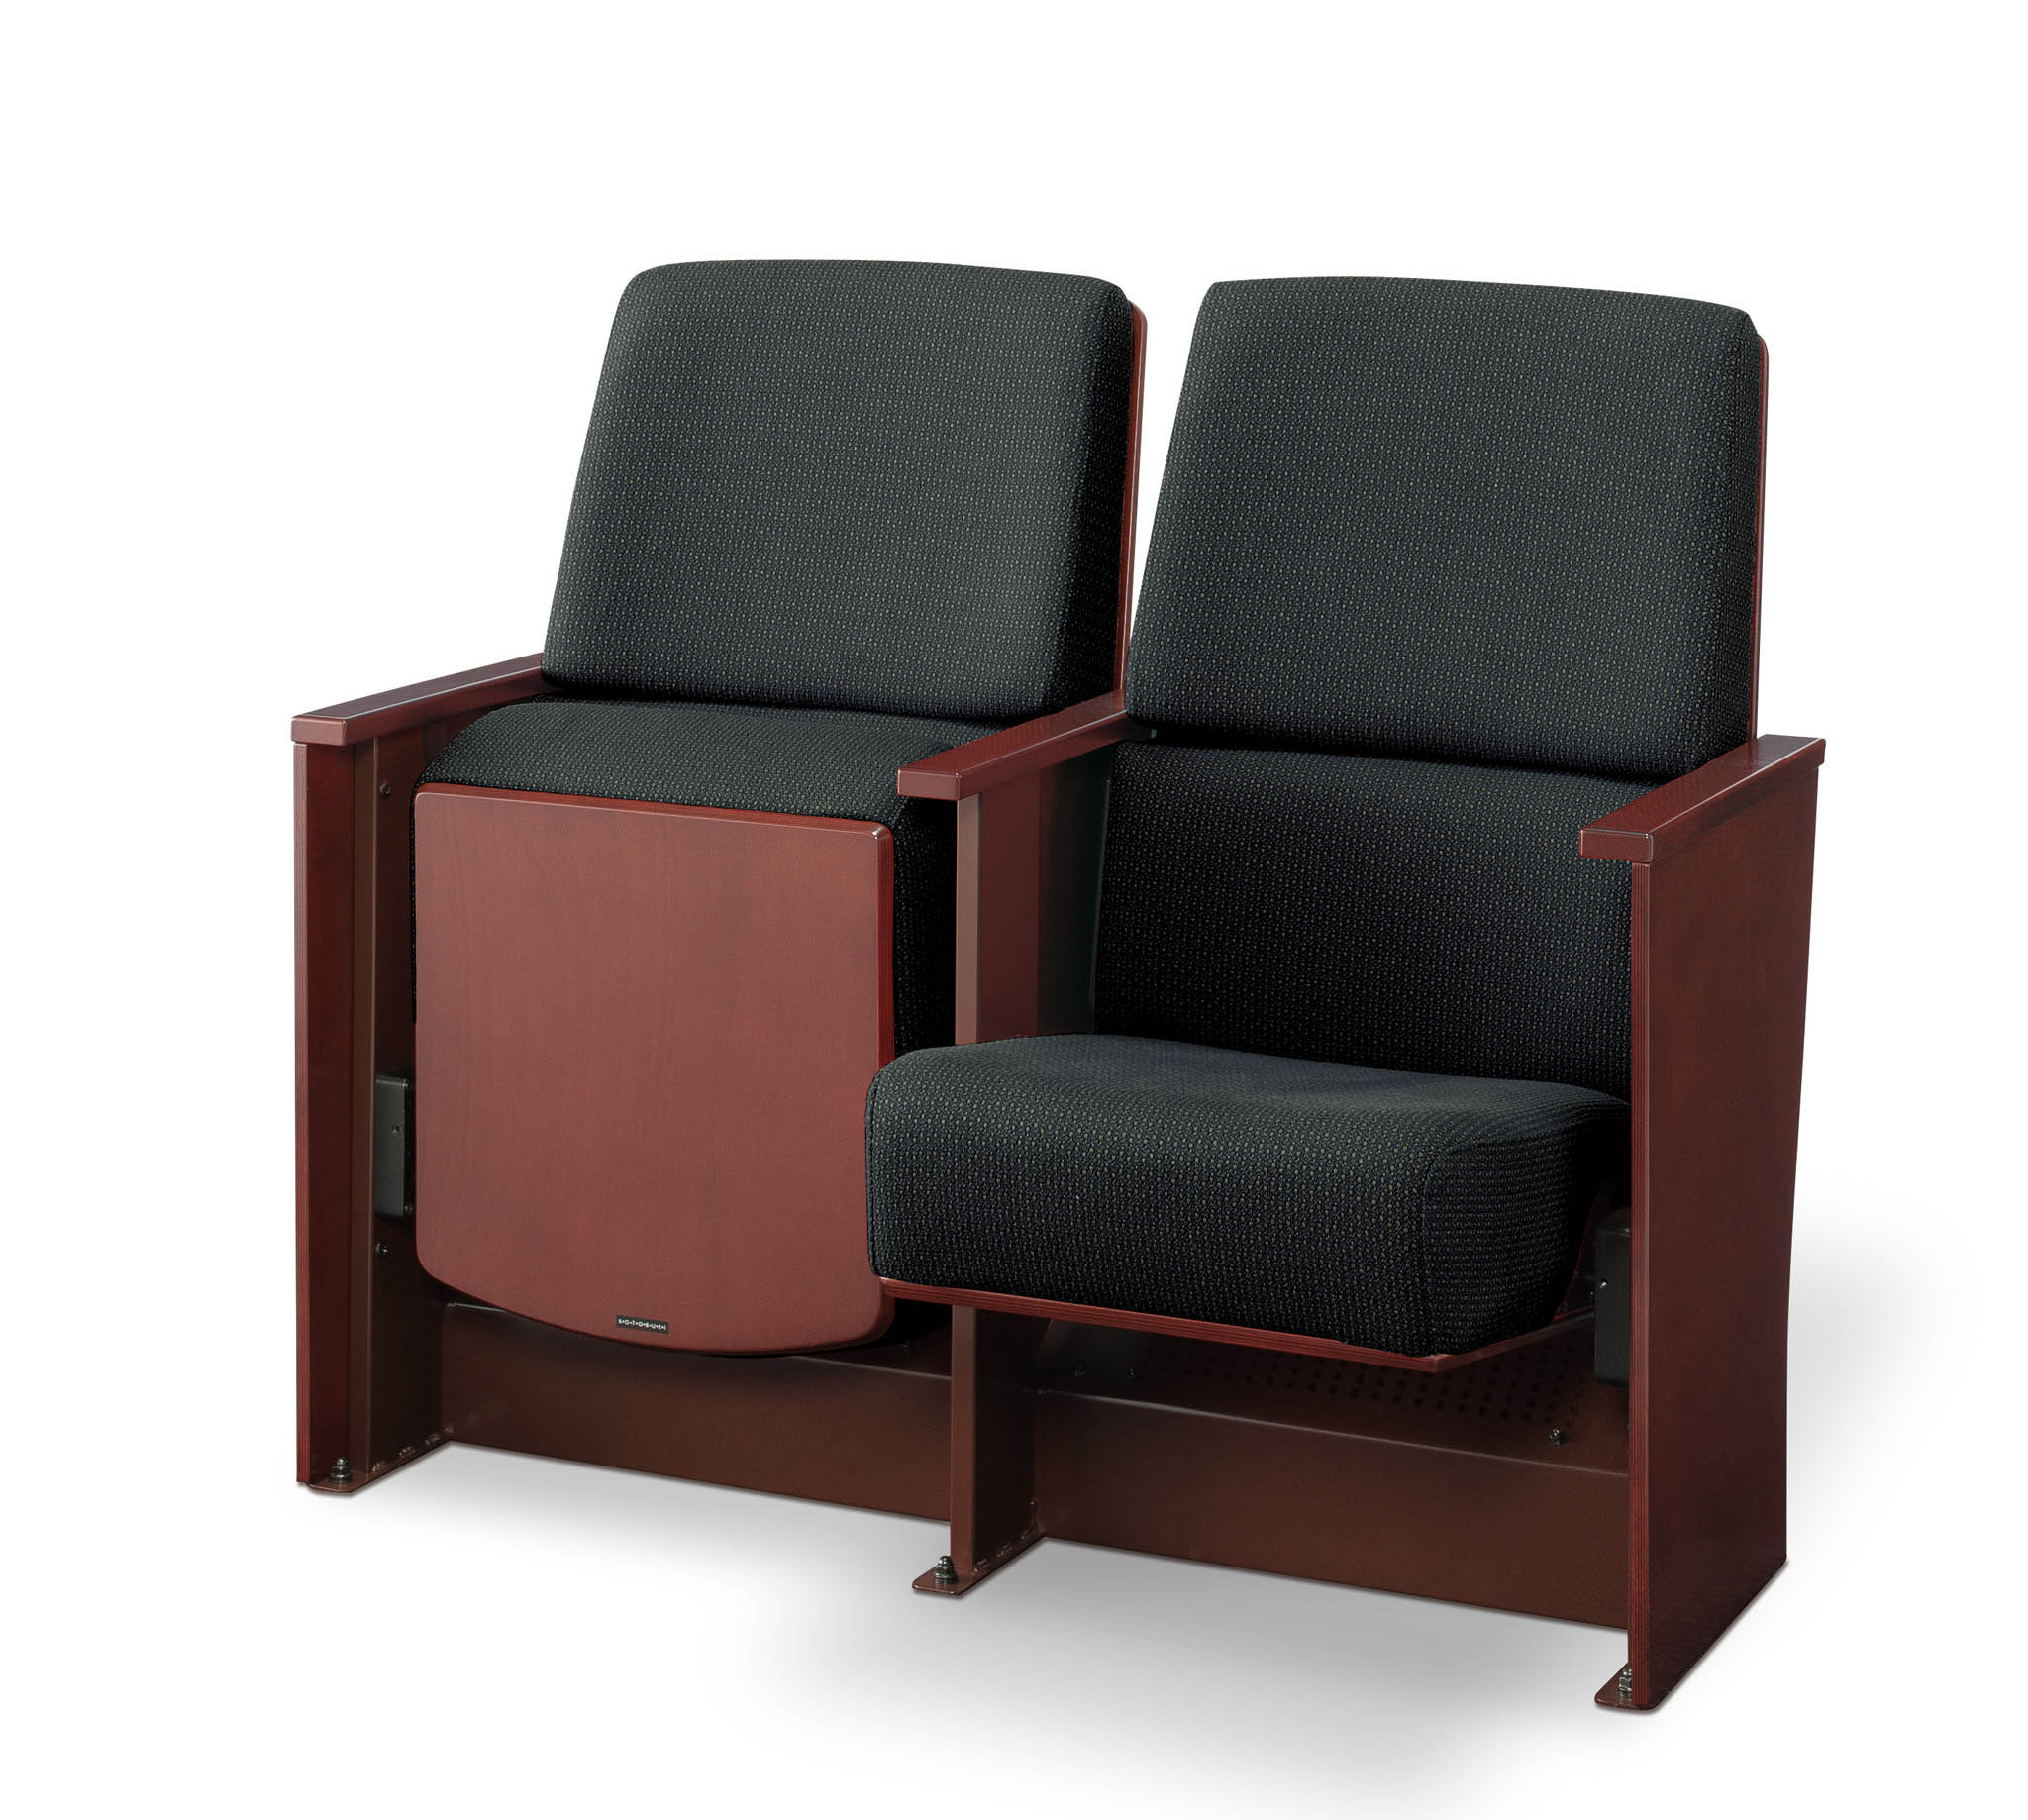 Theater Seating Chairs with air-conditioning system "MyAir T4 series"